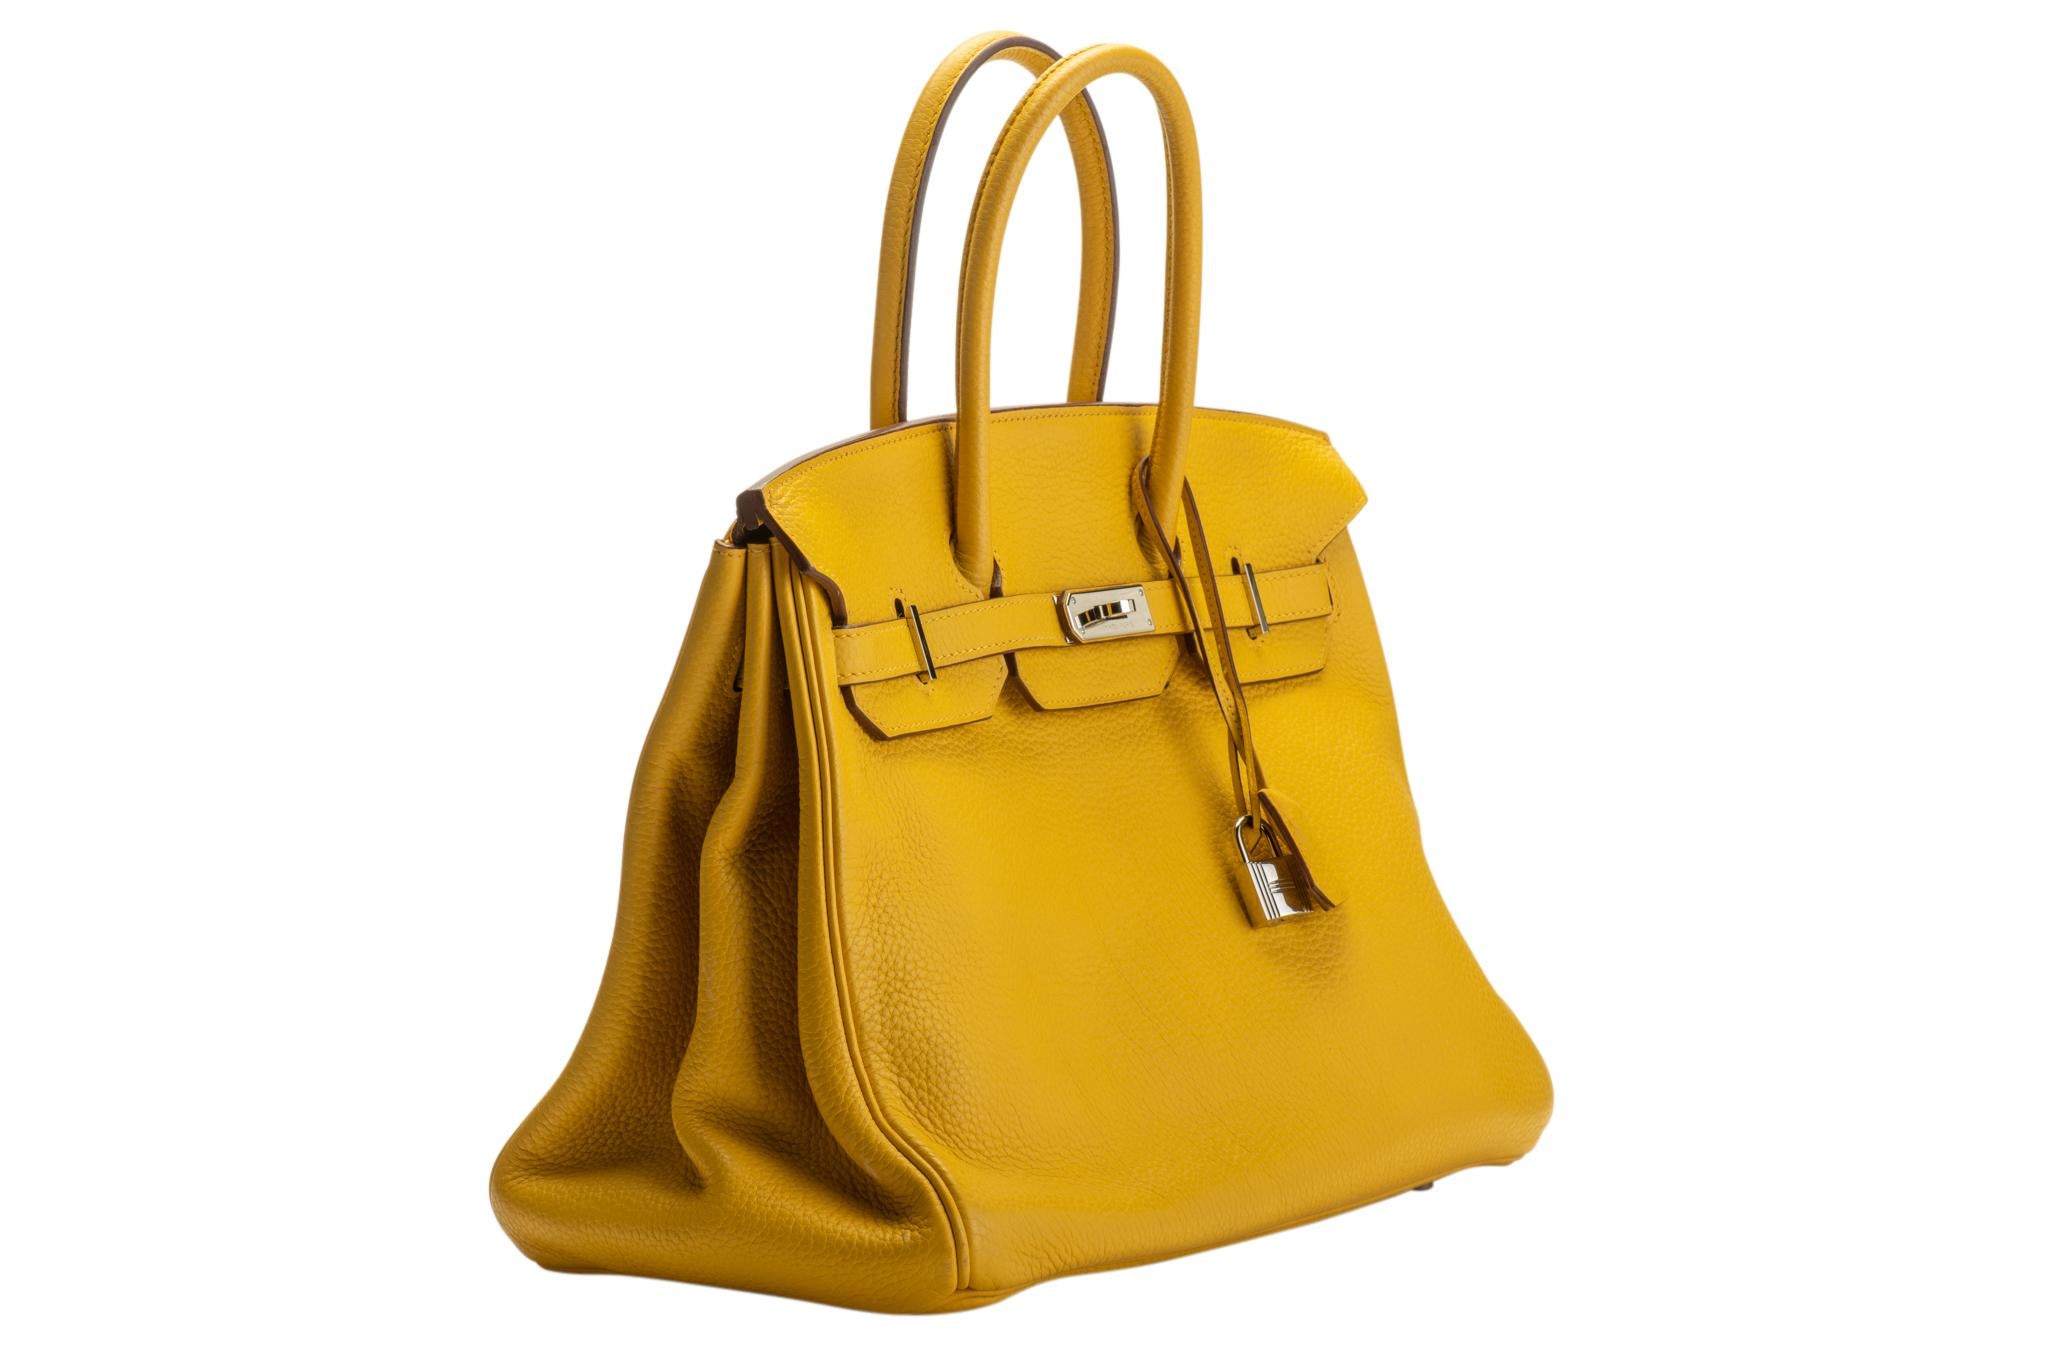 Hermes Birkin 35 clemence leather jaune d'or and palladium hardware. Date stamp M for 2009. Comes with original dust cover.